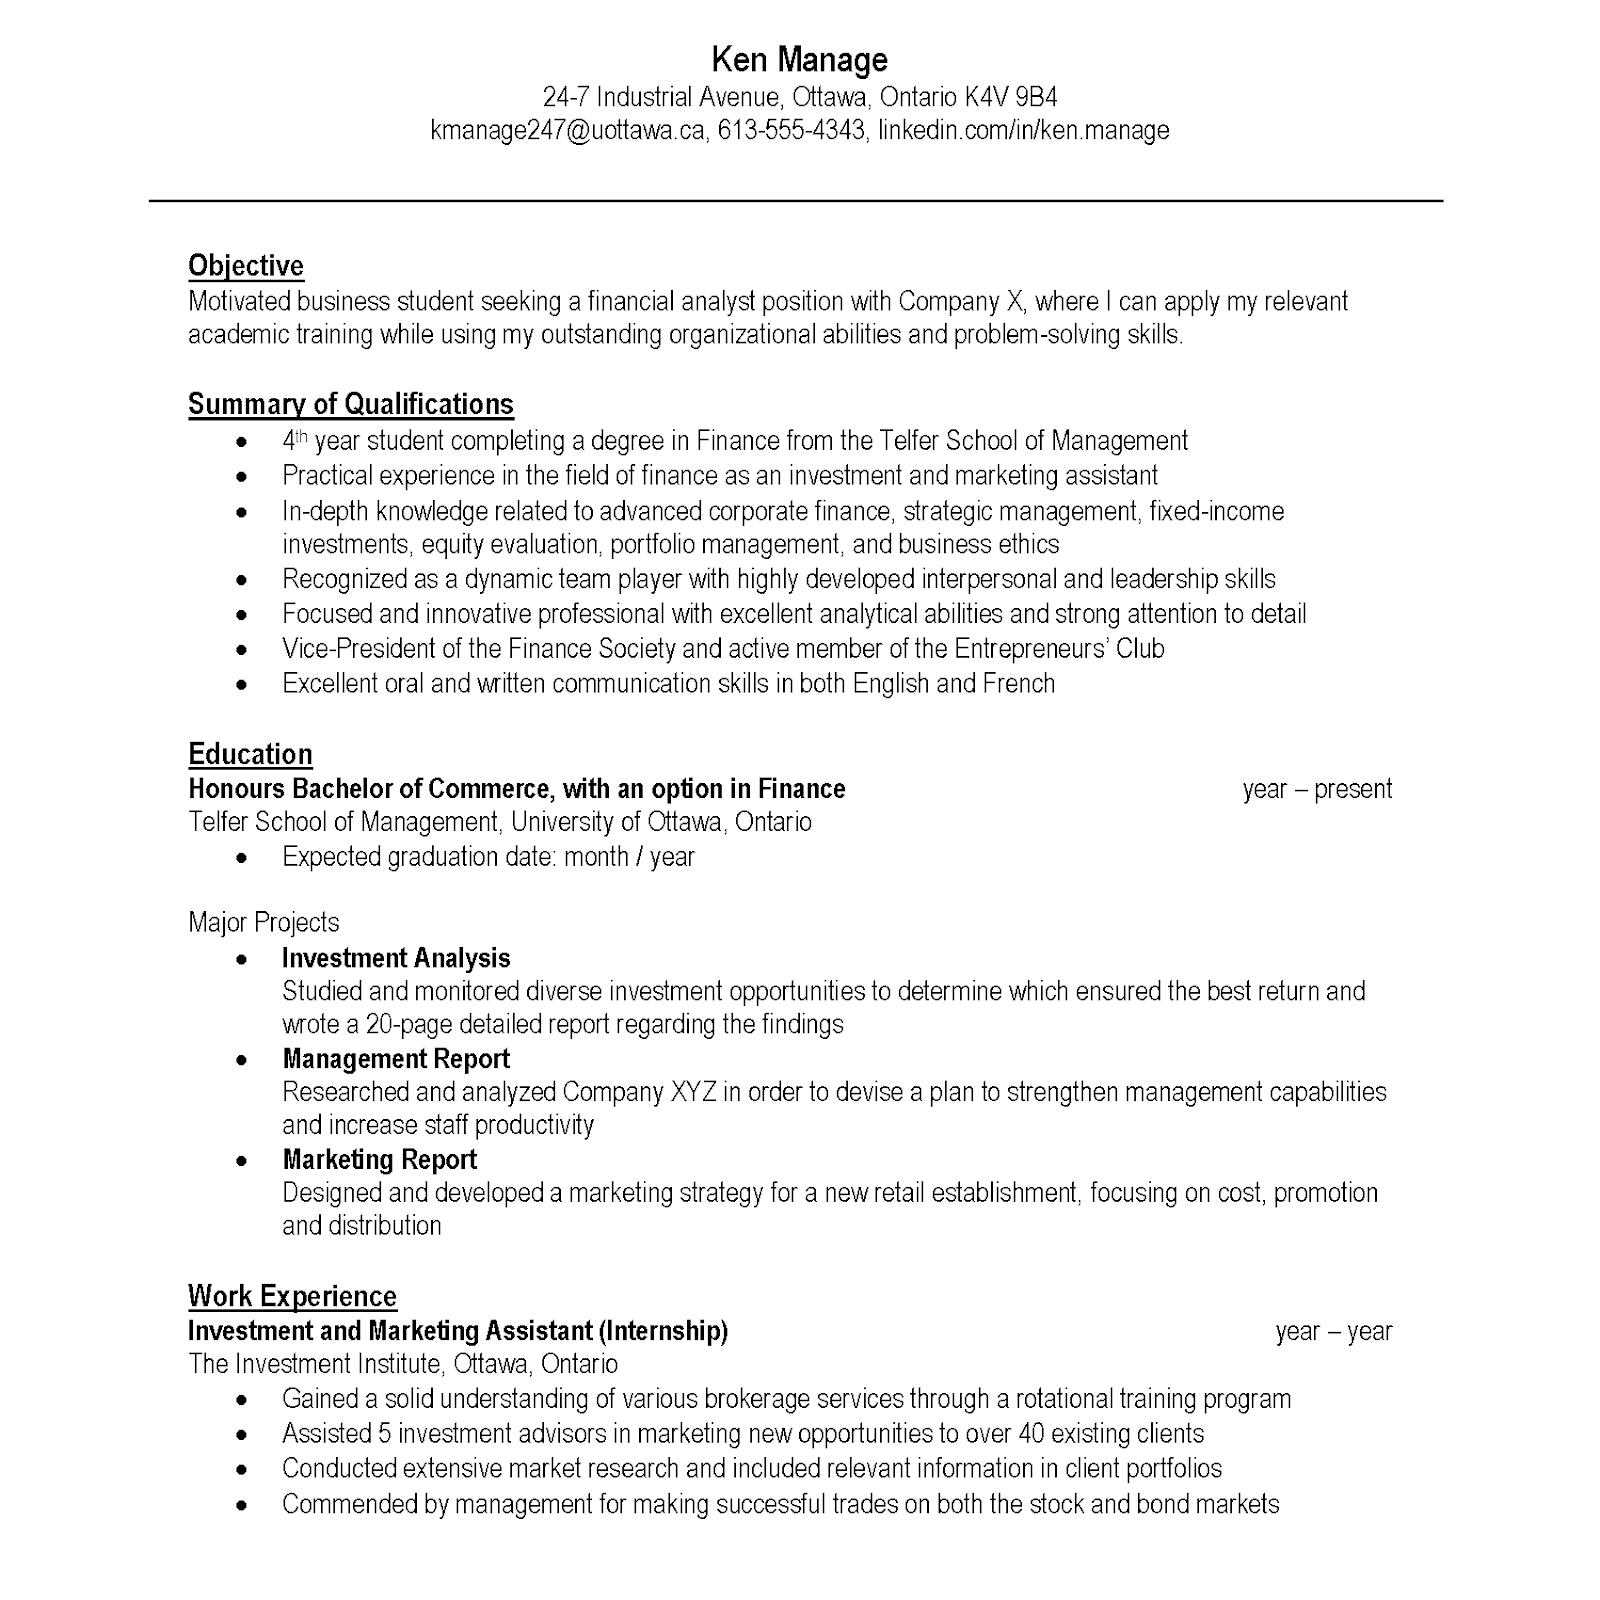 marketing assistant resume example, assistant marketing manager resume examples 2019, marketing assistant resume objective examples 2020, digital marketing assistant resume examples